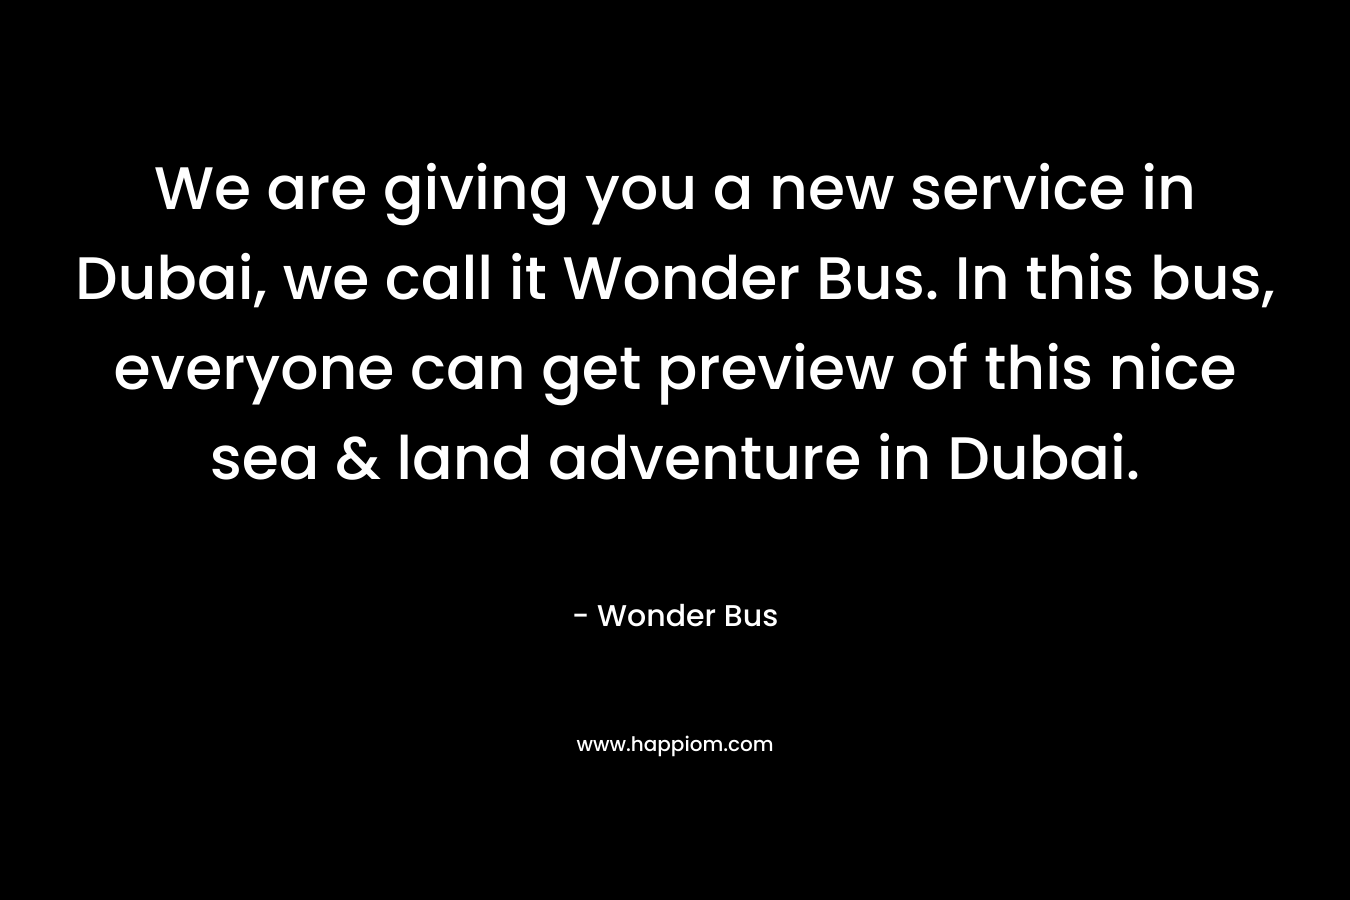 We are giving you a new service in Dubai, we call it Wonder Bus. In this bus, everyone can get preview of this nice sea & land adventure in Dubai. – Wonder Bus